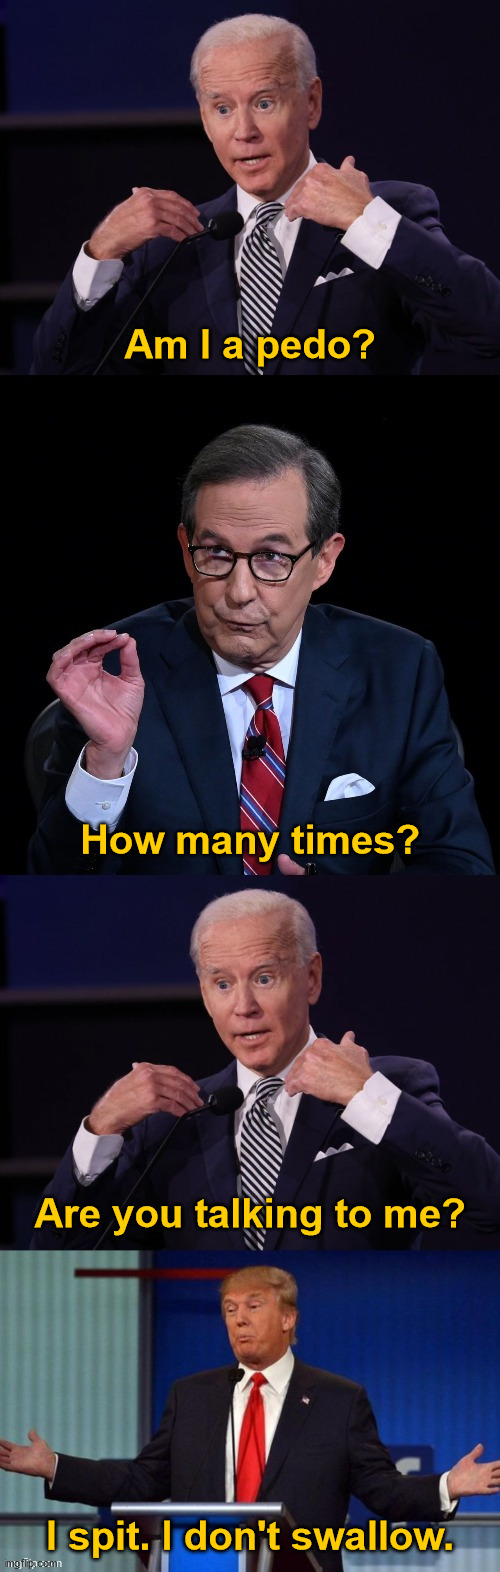 Am I a pedo? | Am I a pedo? How many times? Are you talking to me? I spit. I don't swallow. | image tagged in 2020 debate,creepy joe biden,creepy donald trump,pedophiles,government corruption,election fraud | made w/ Imgflip meme maker